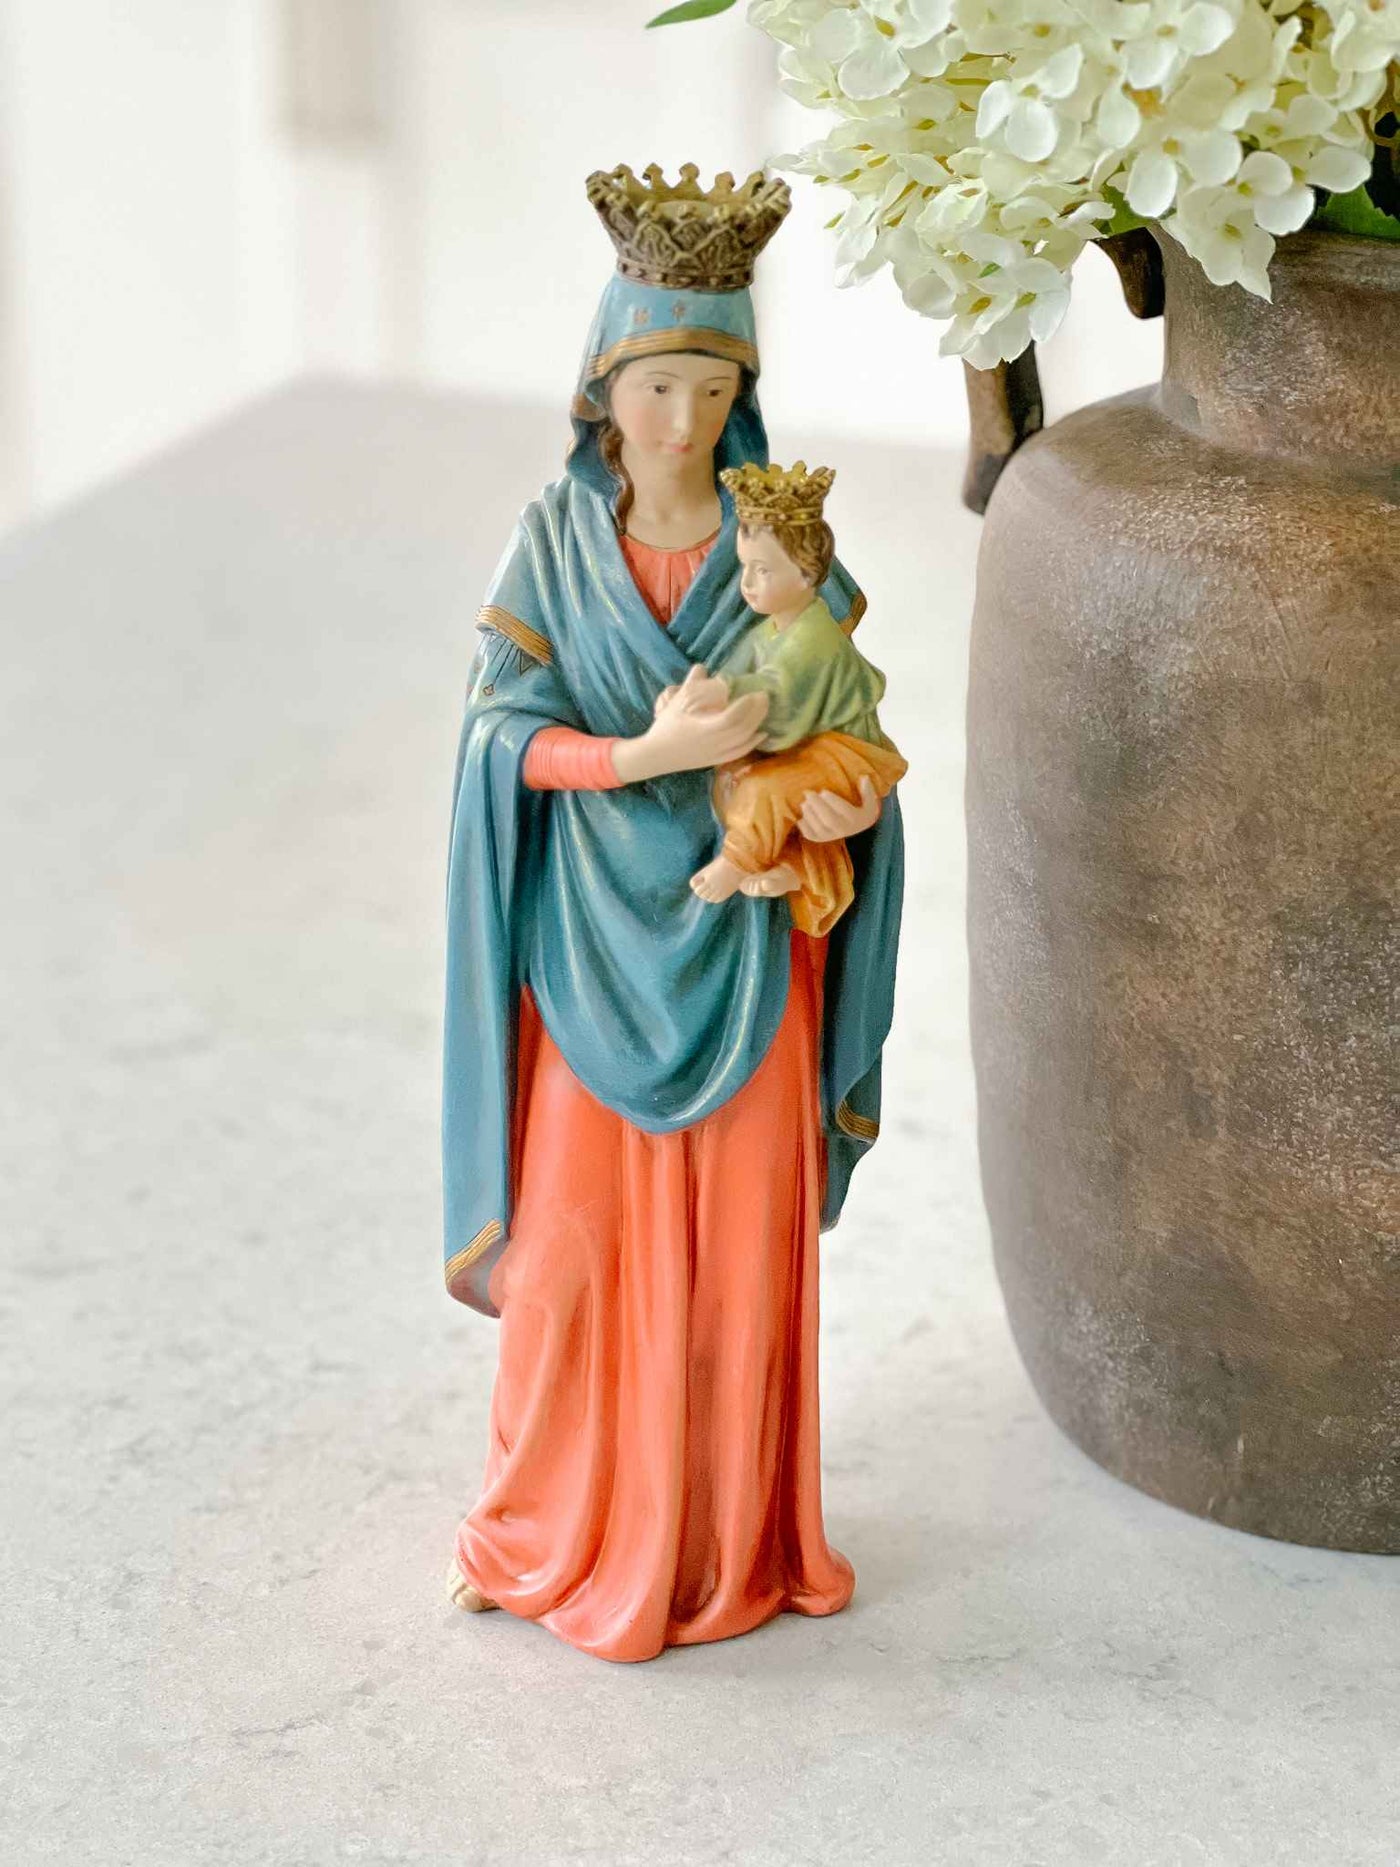 Our Lady of Perpetual Help - Statue